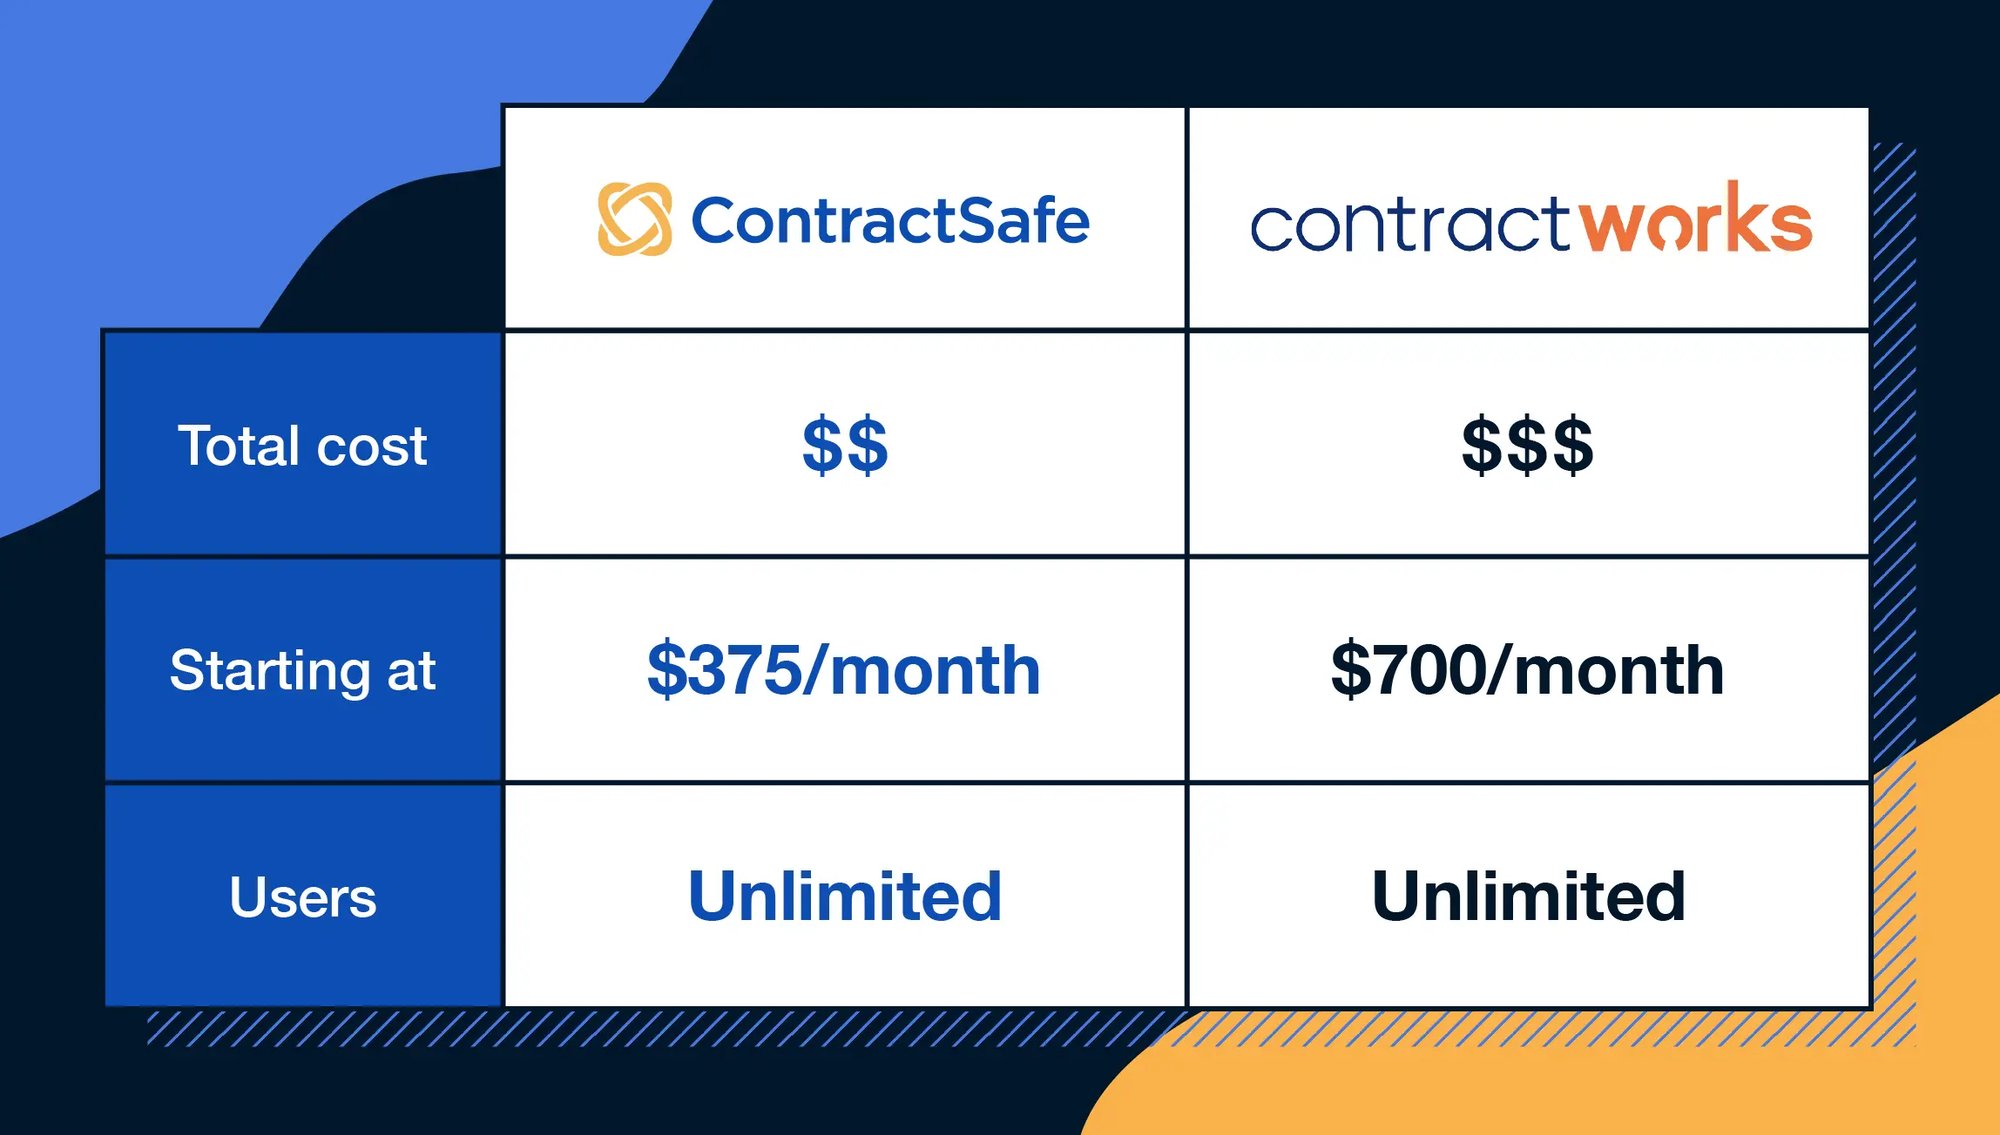 contractsafe-vs-contractworks-costs-2